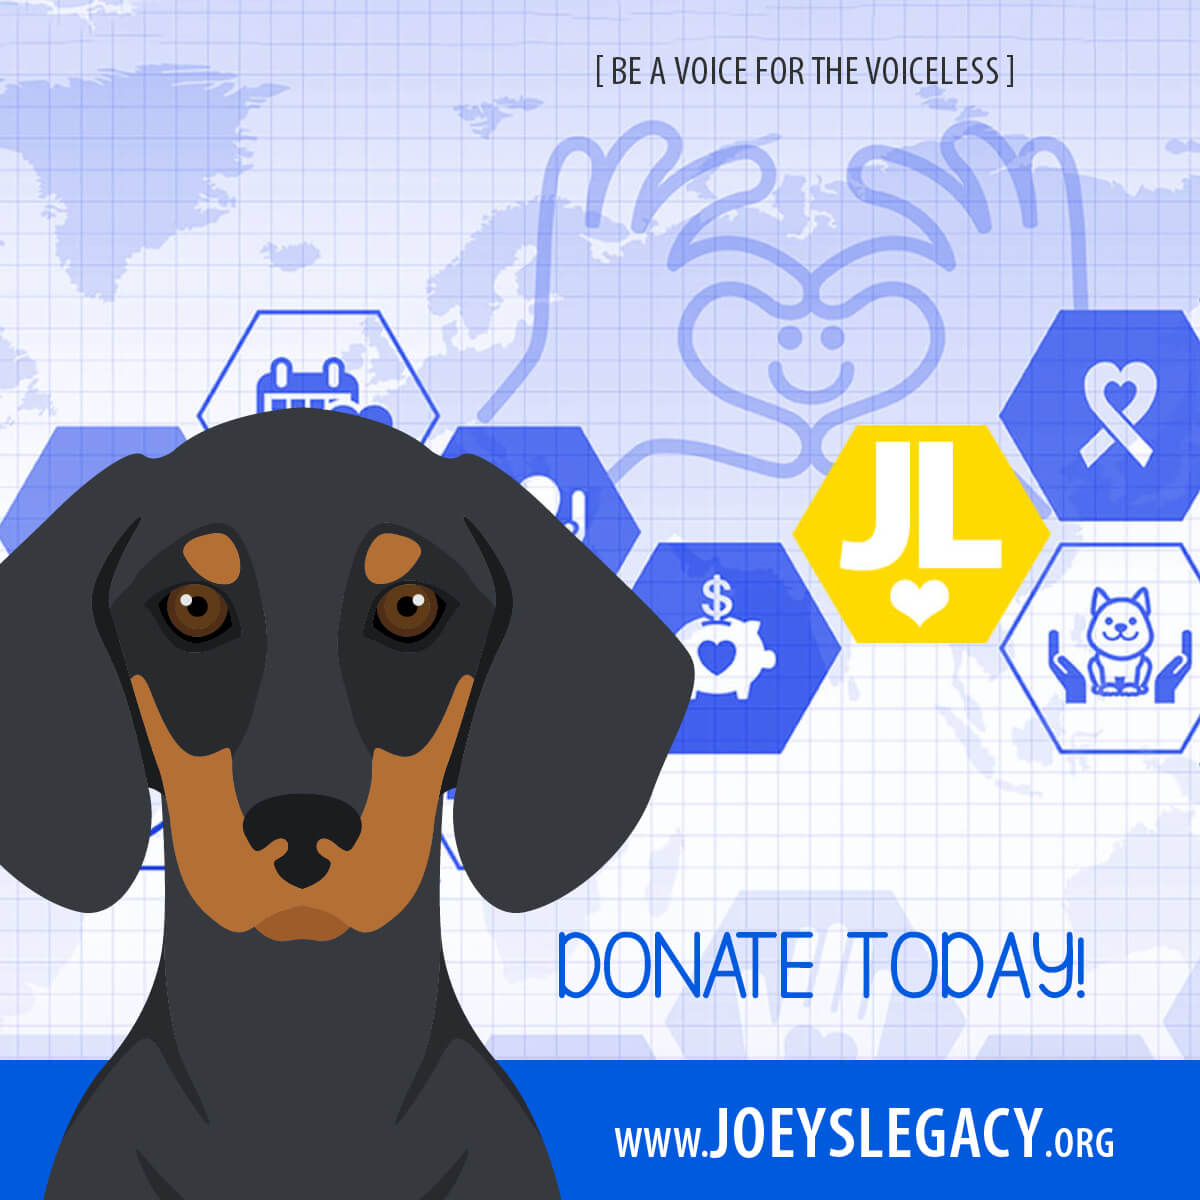 Joey's Legacy Social Media Post Be a voice for the voiceless. Donate Today!